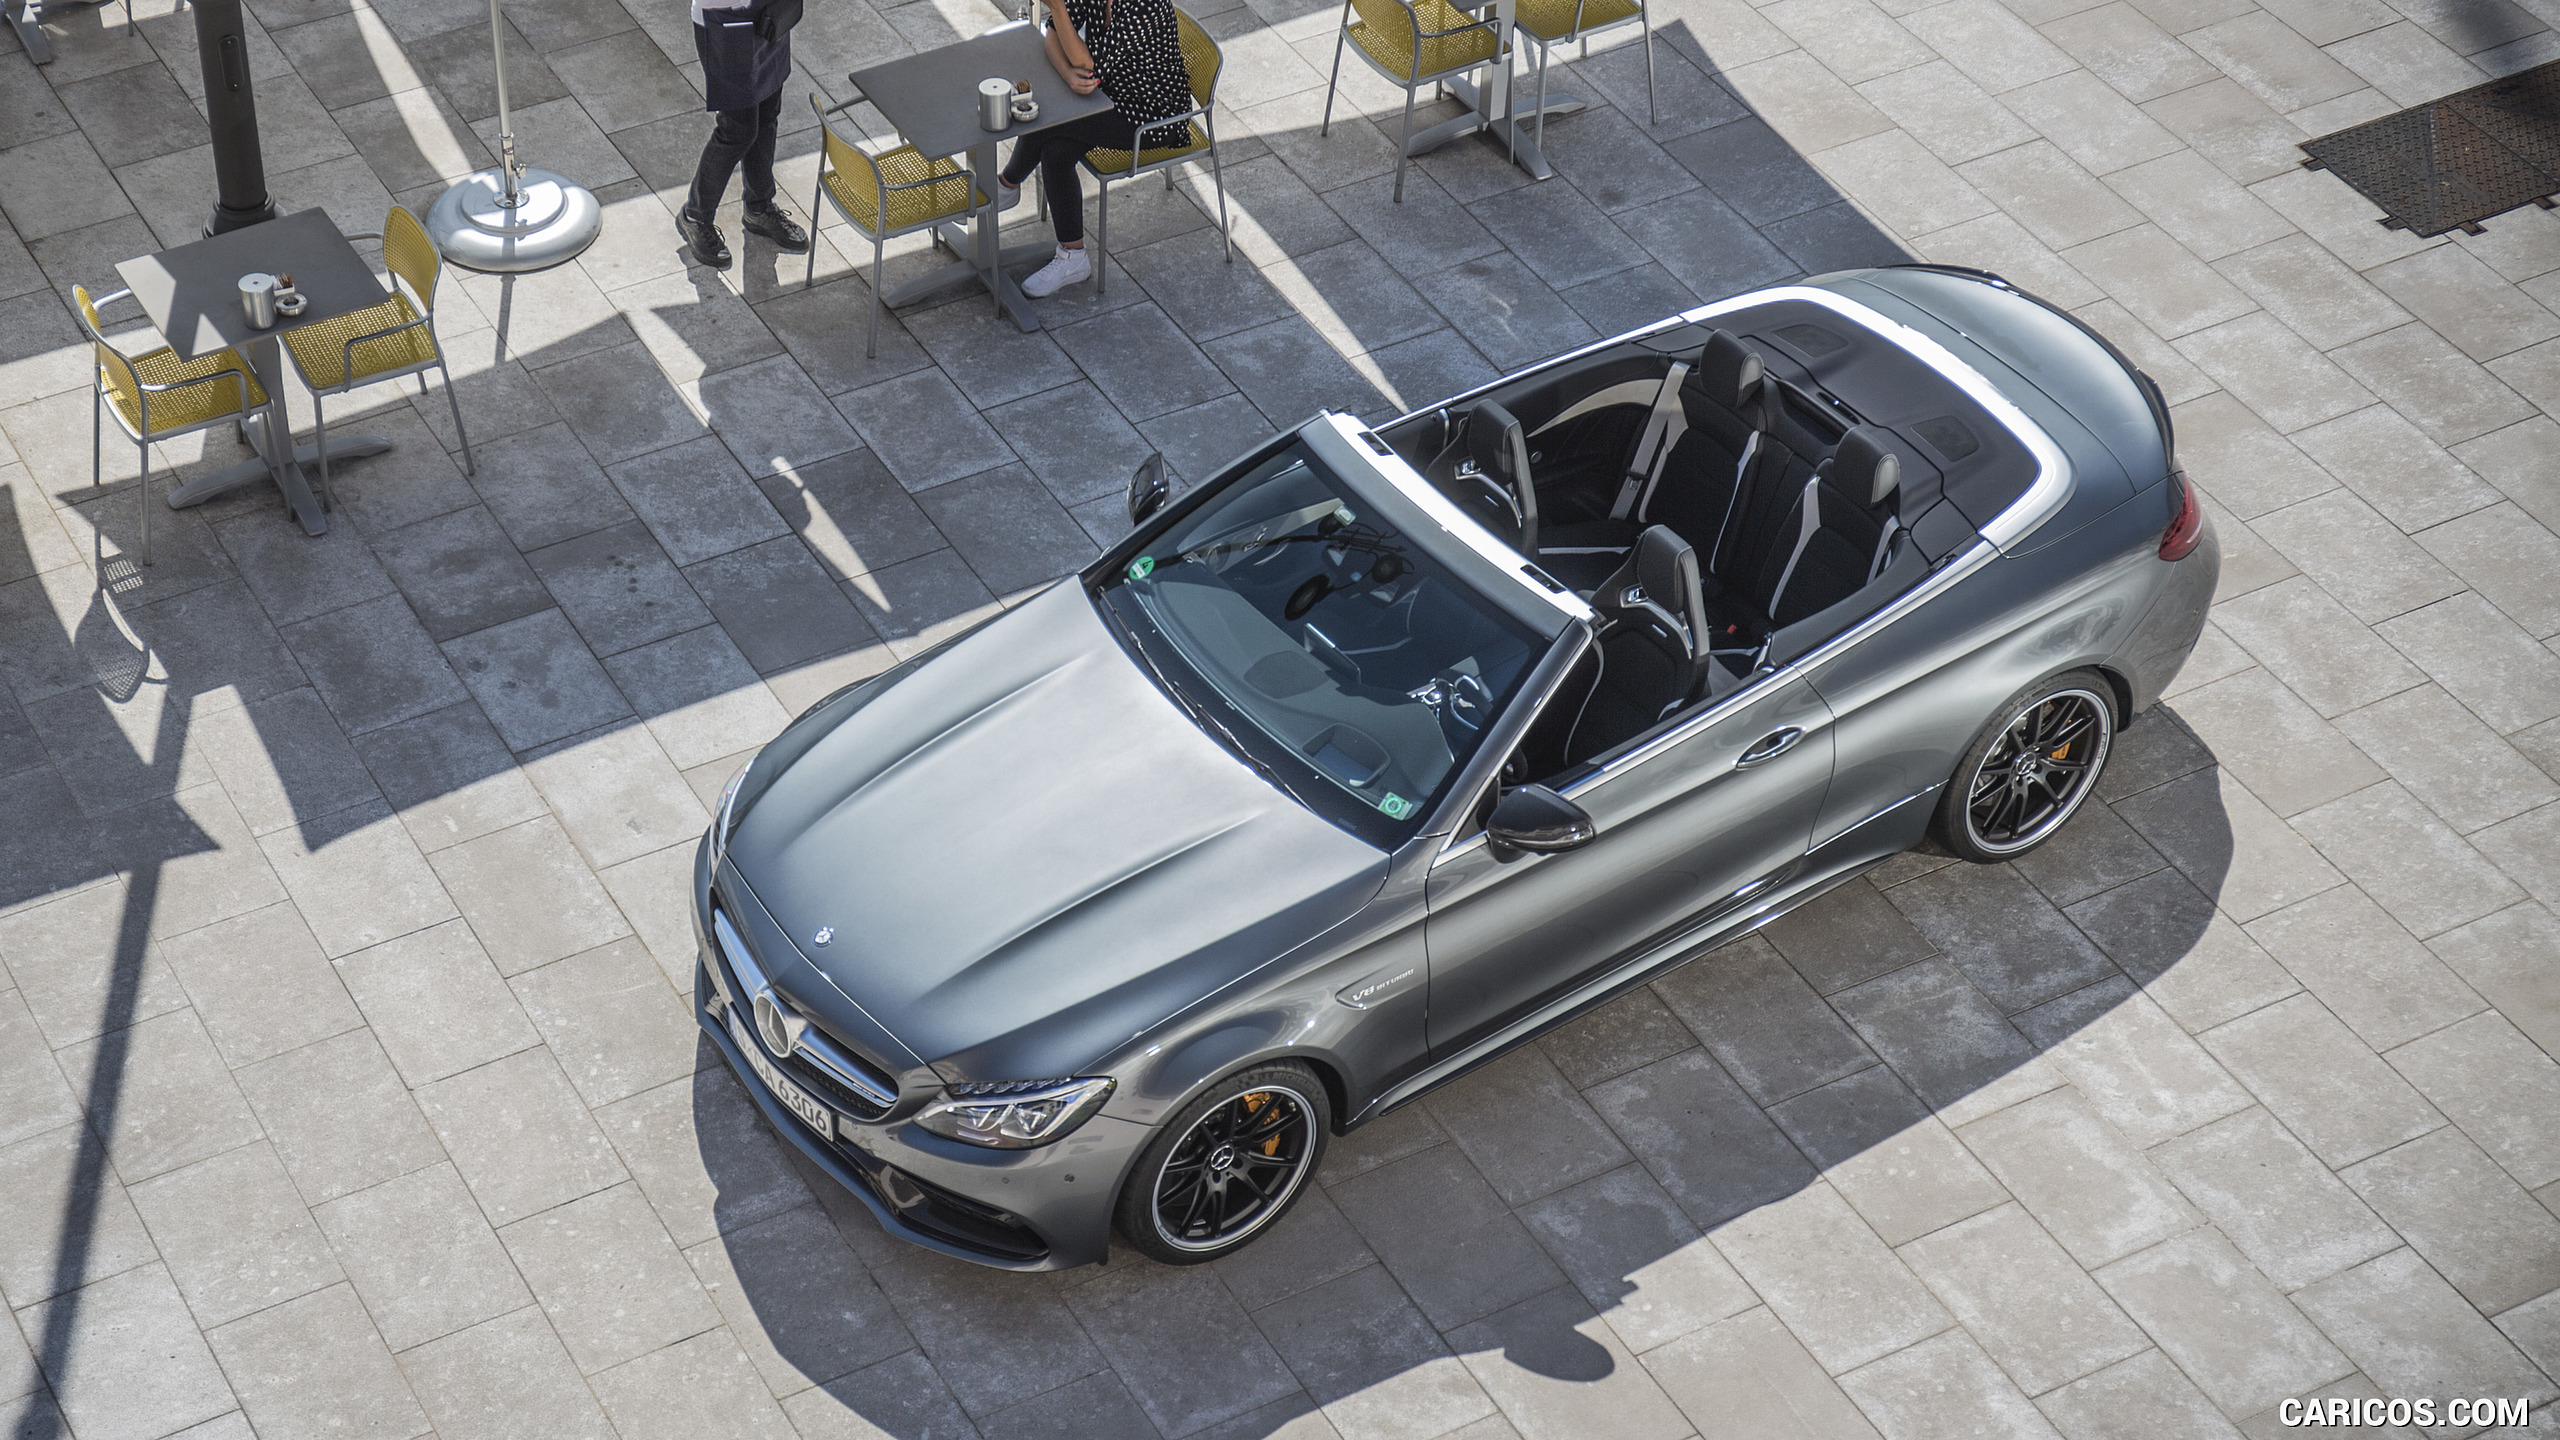 2017 Mercedes-AMG C63 S Cabriolet - Top, #58 of 222